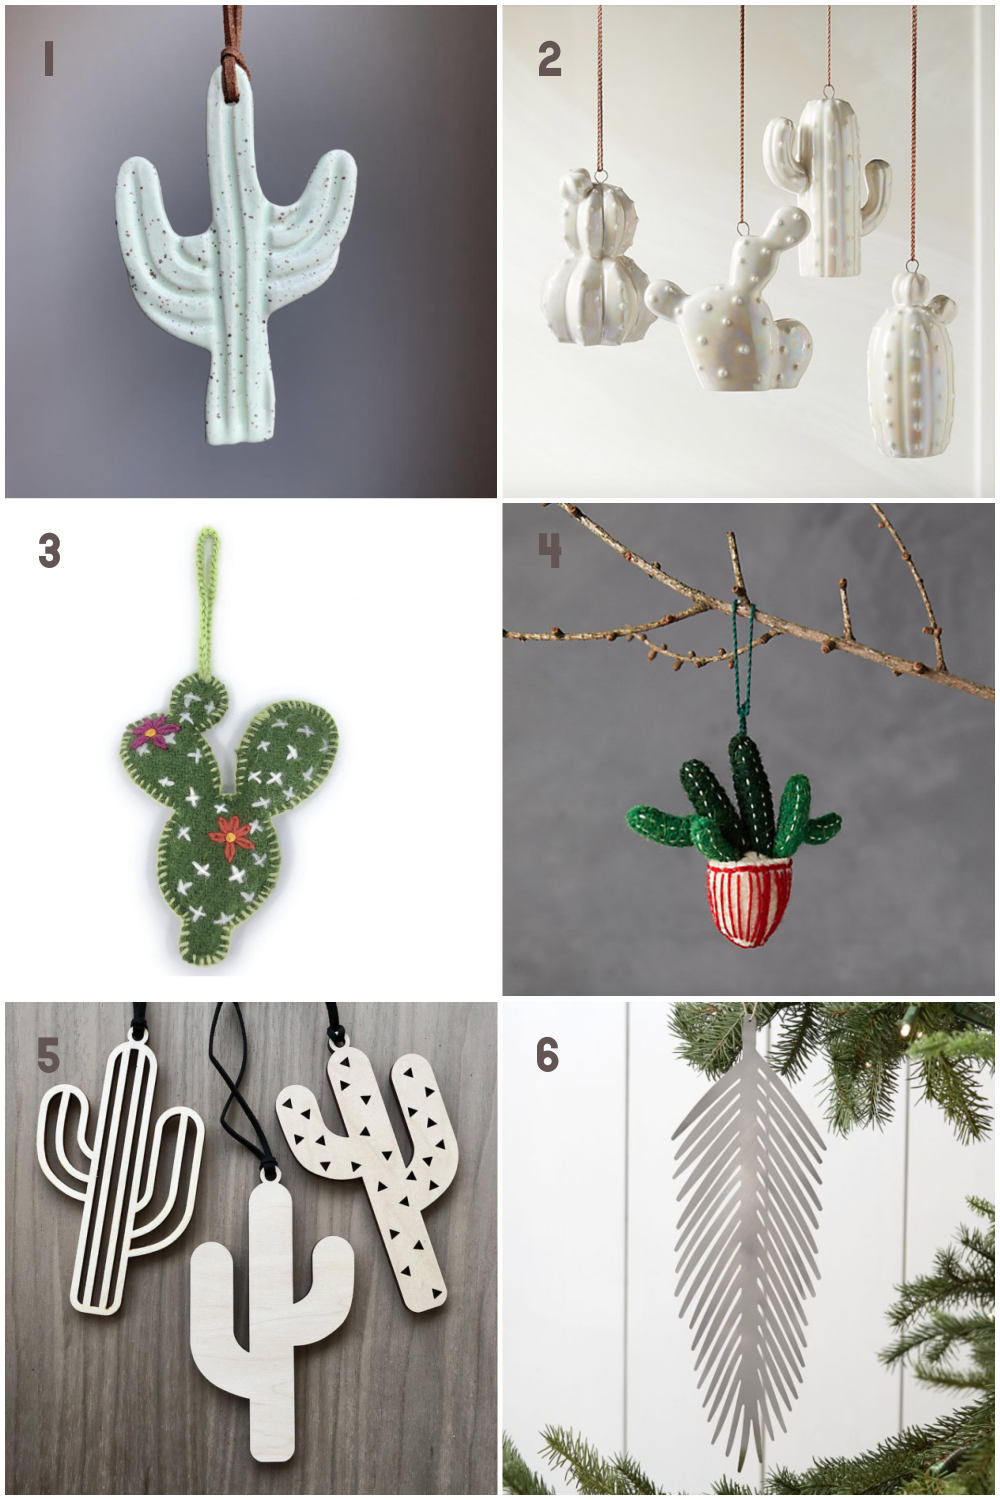 Botanical Ornaments ideas for Plant Lovers - Clever Bloom